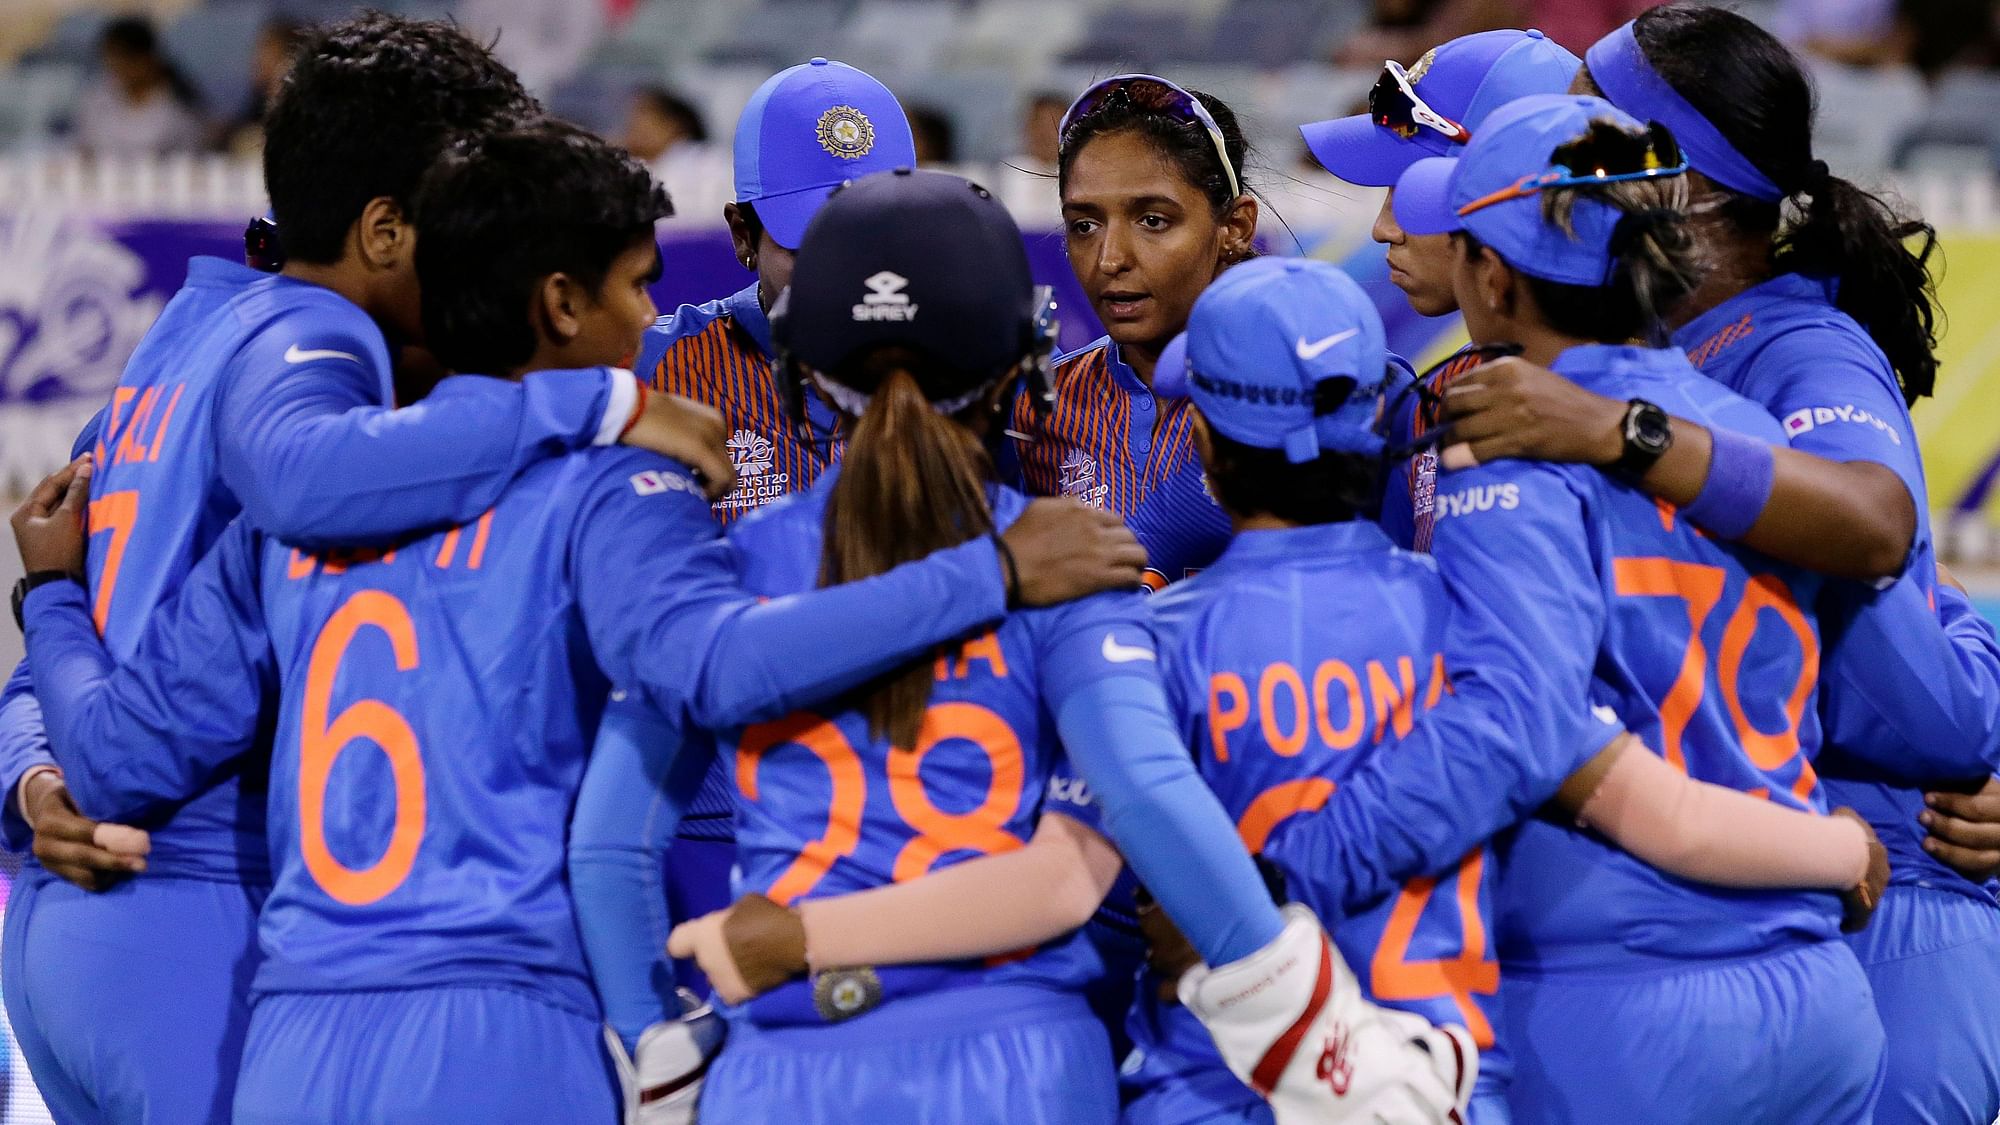 ICC Women’s T20 World Cup Shafali, Poonam Guide India to 18Run Win vs